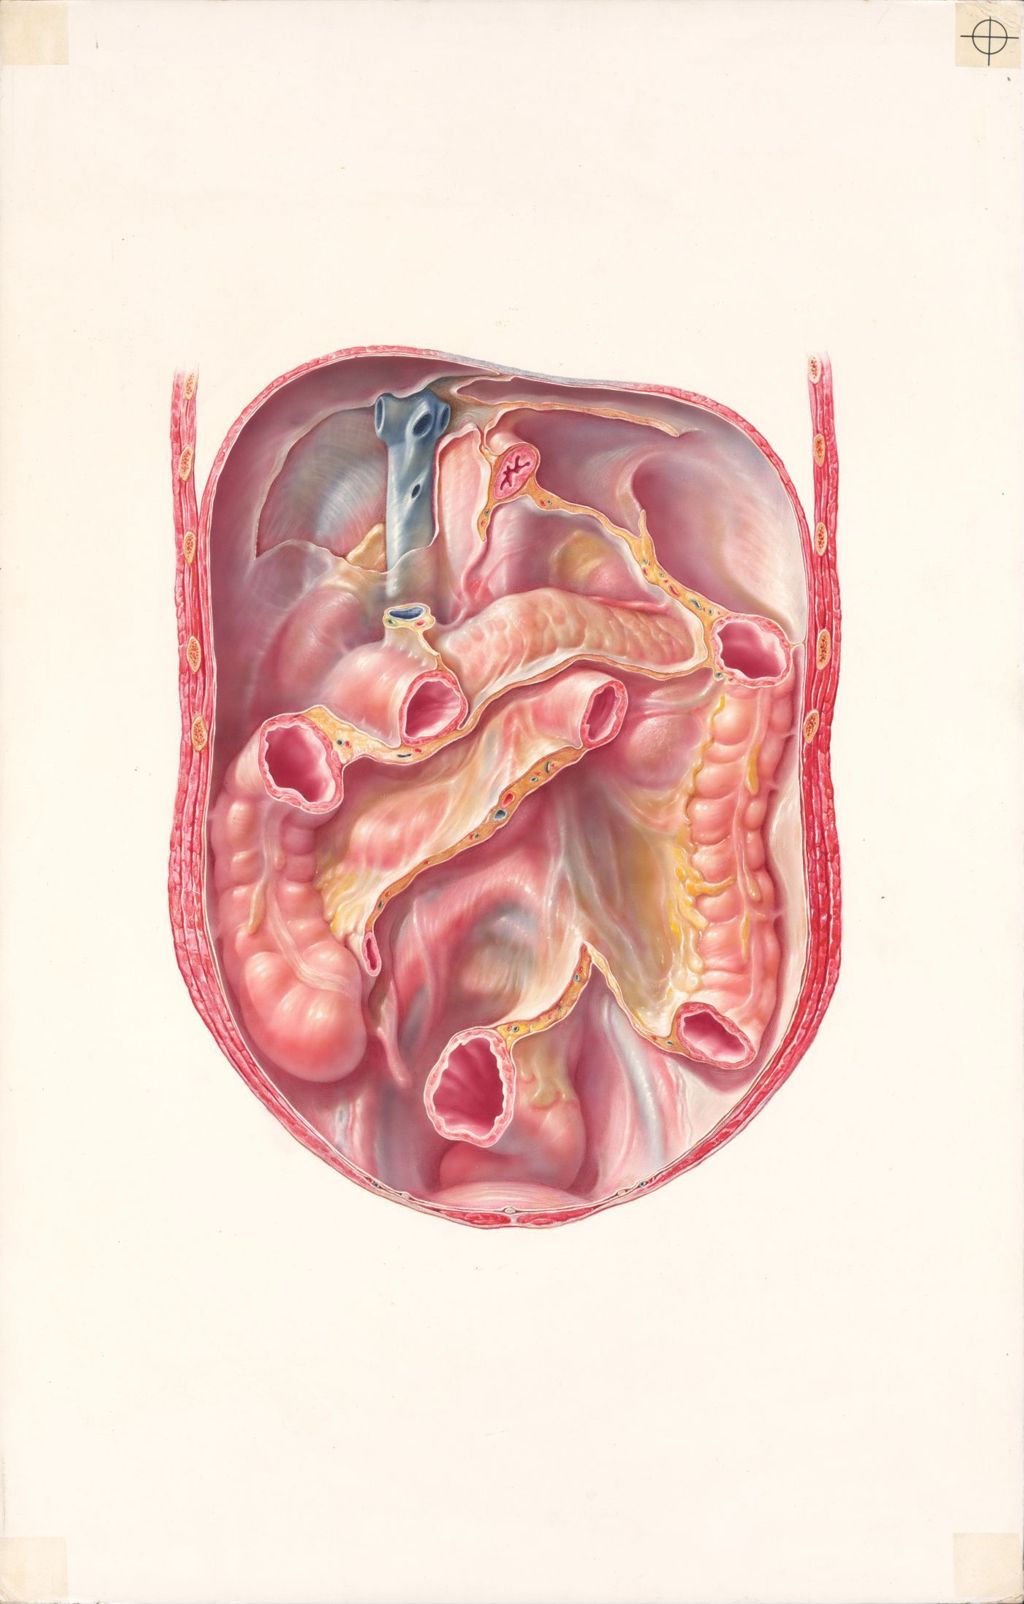 Miniature of Medical Profiles, The Anatomical Disposition of the Peritoneum, Plate II, The Posterior Abdominal Wall, Showing the Lines of Peritoneal Reflection